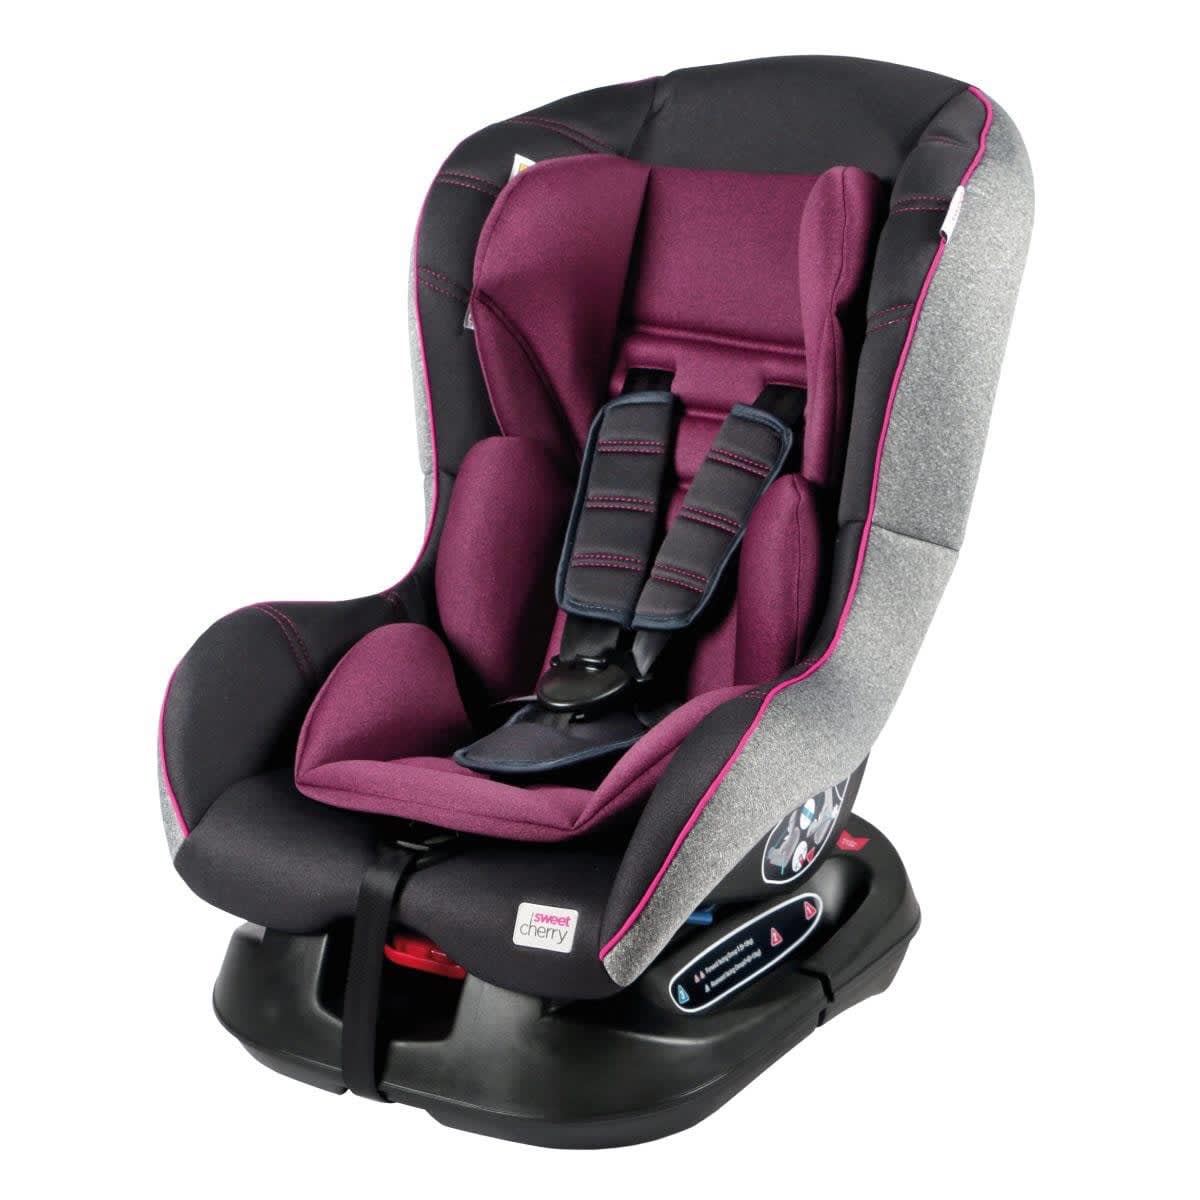 Sweet Cherry Convertible Infant Baby Car Seat-1